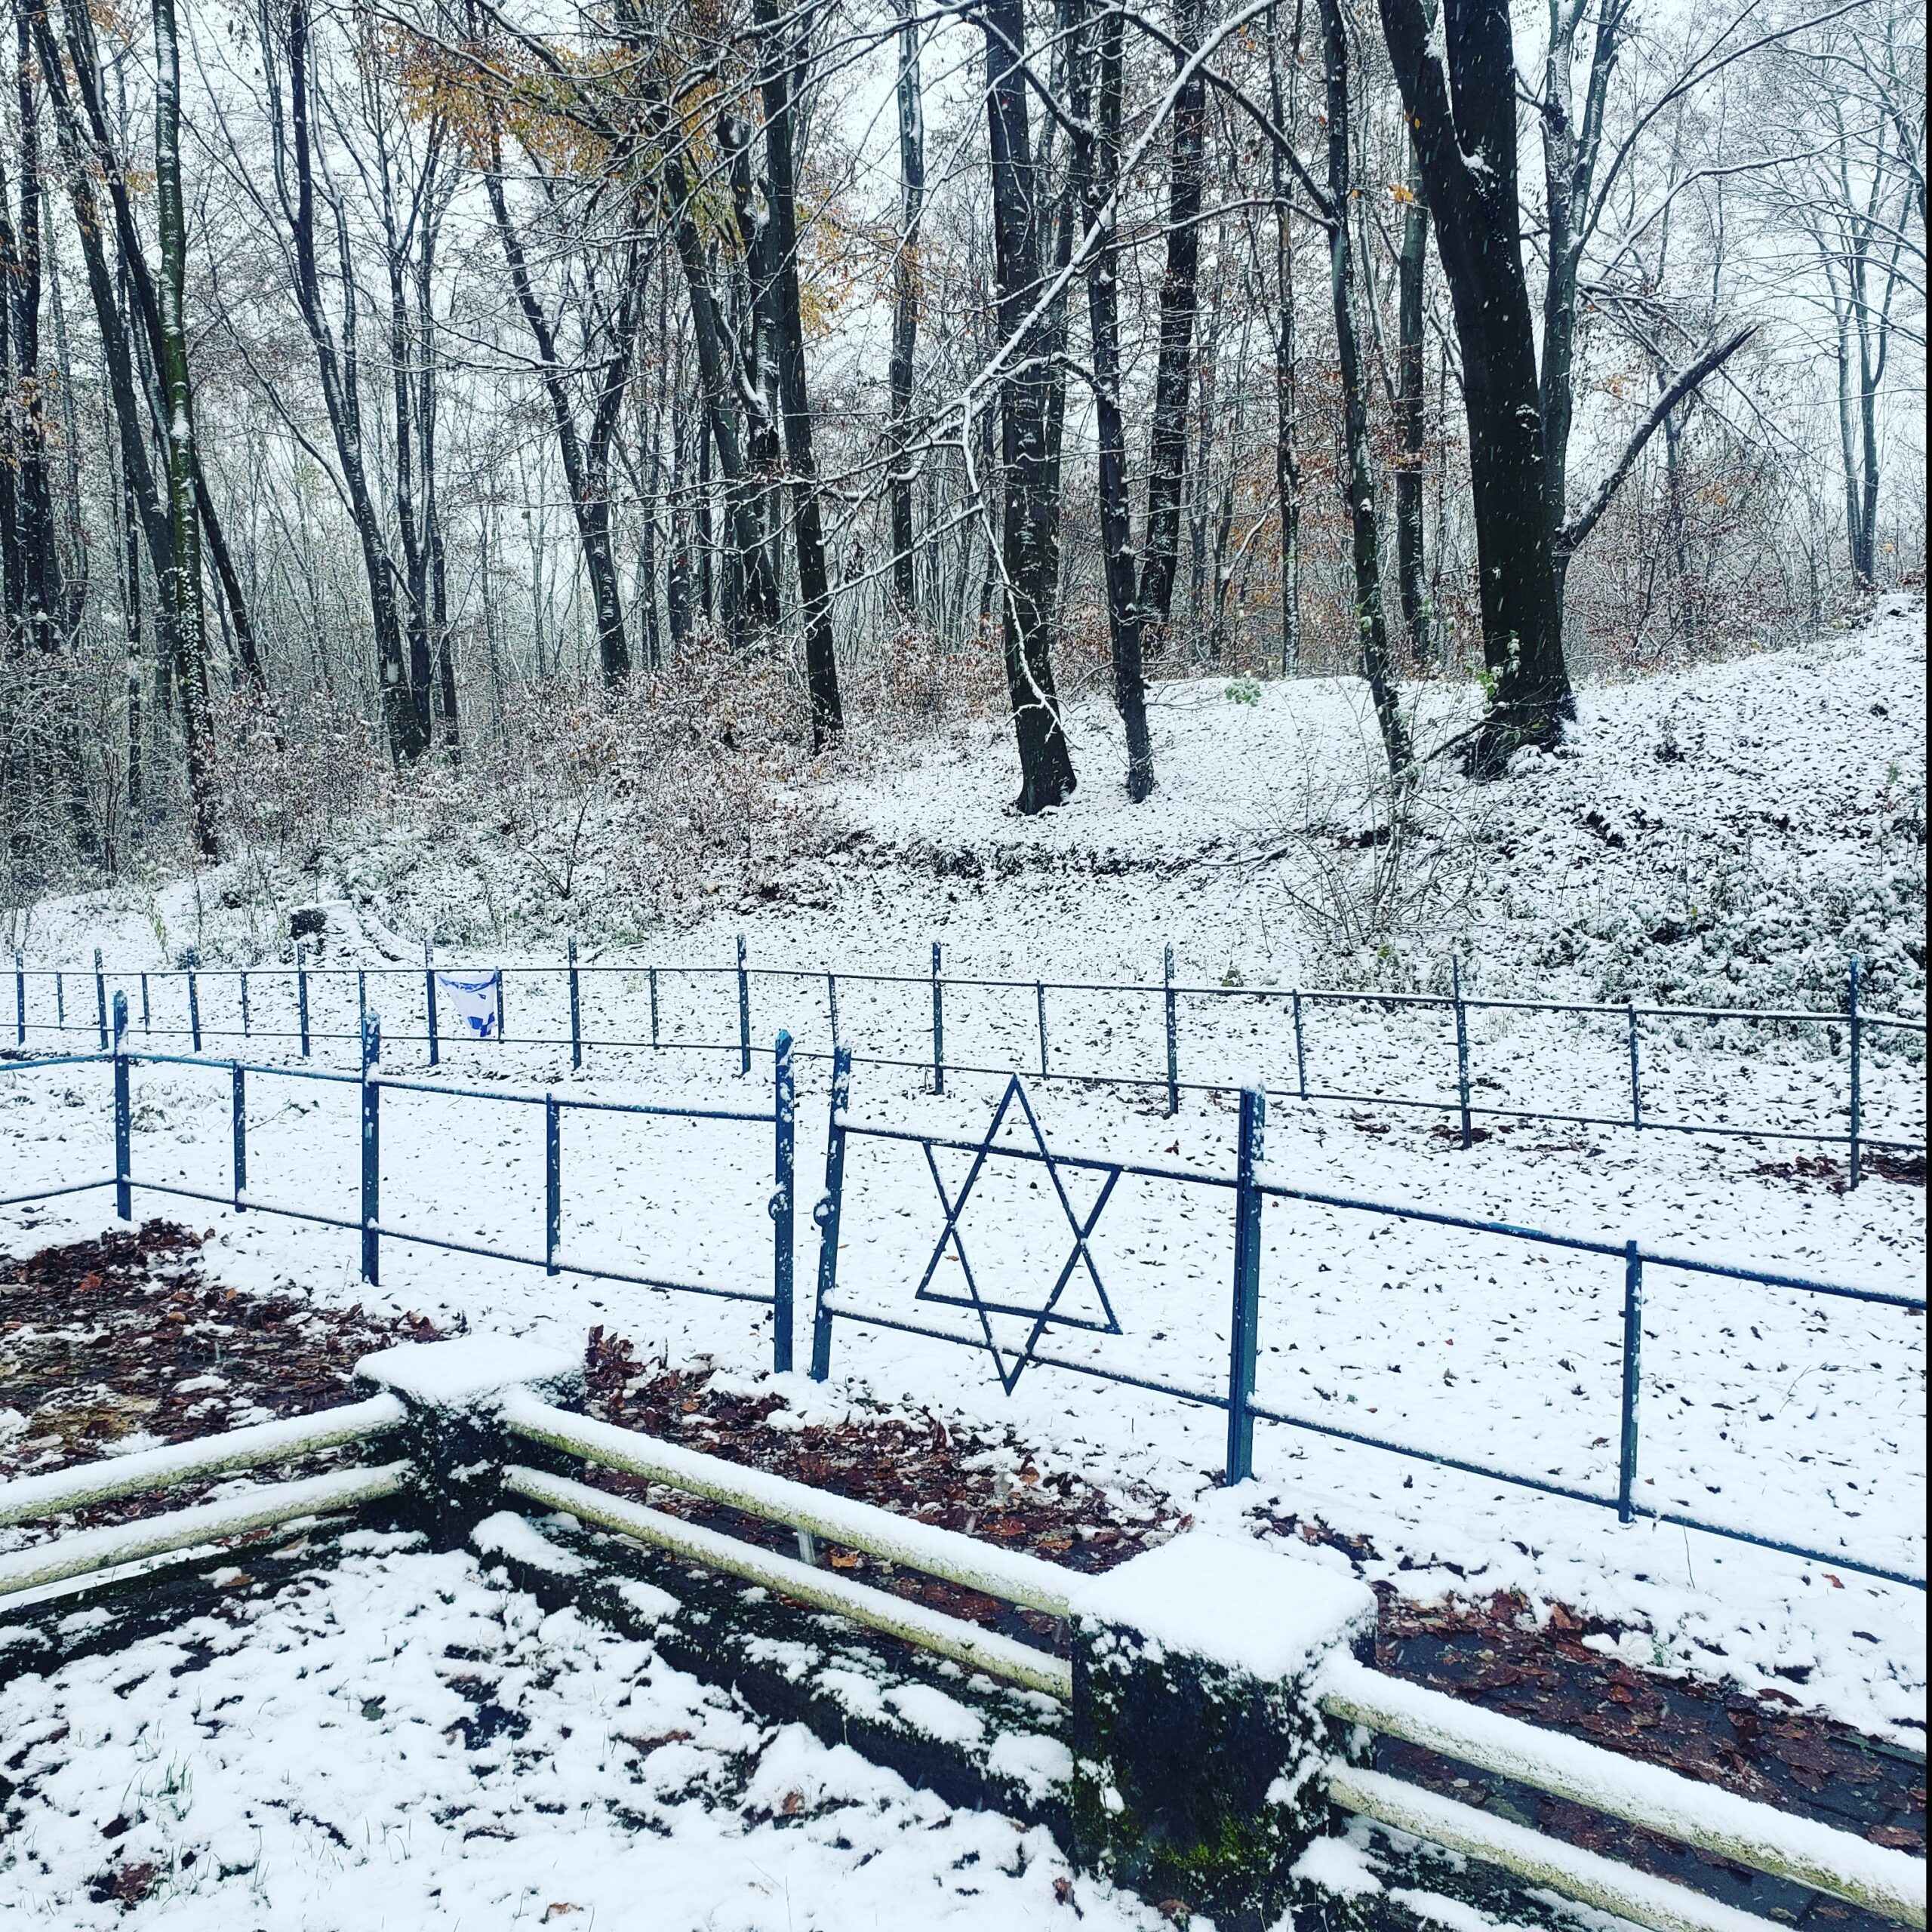 Mass grave in snowy forest marked by a blue fence and star of David